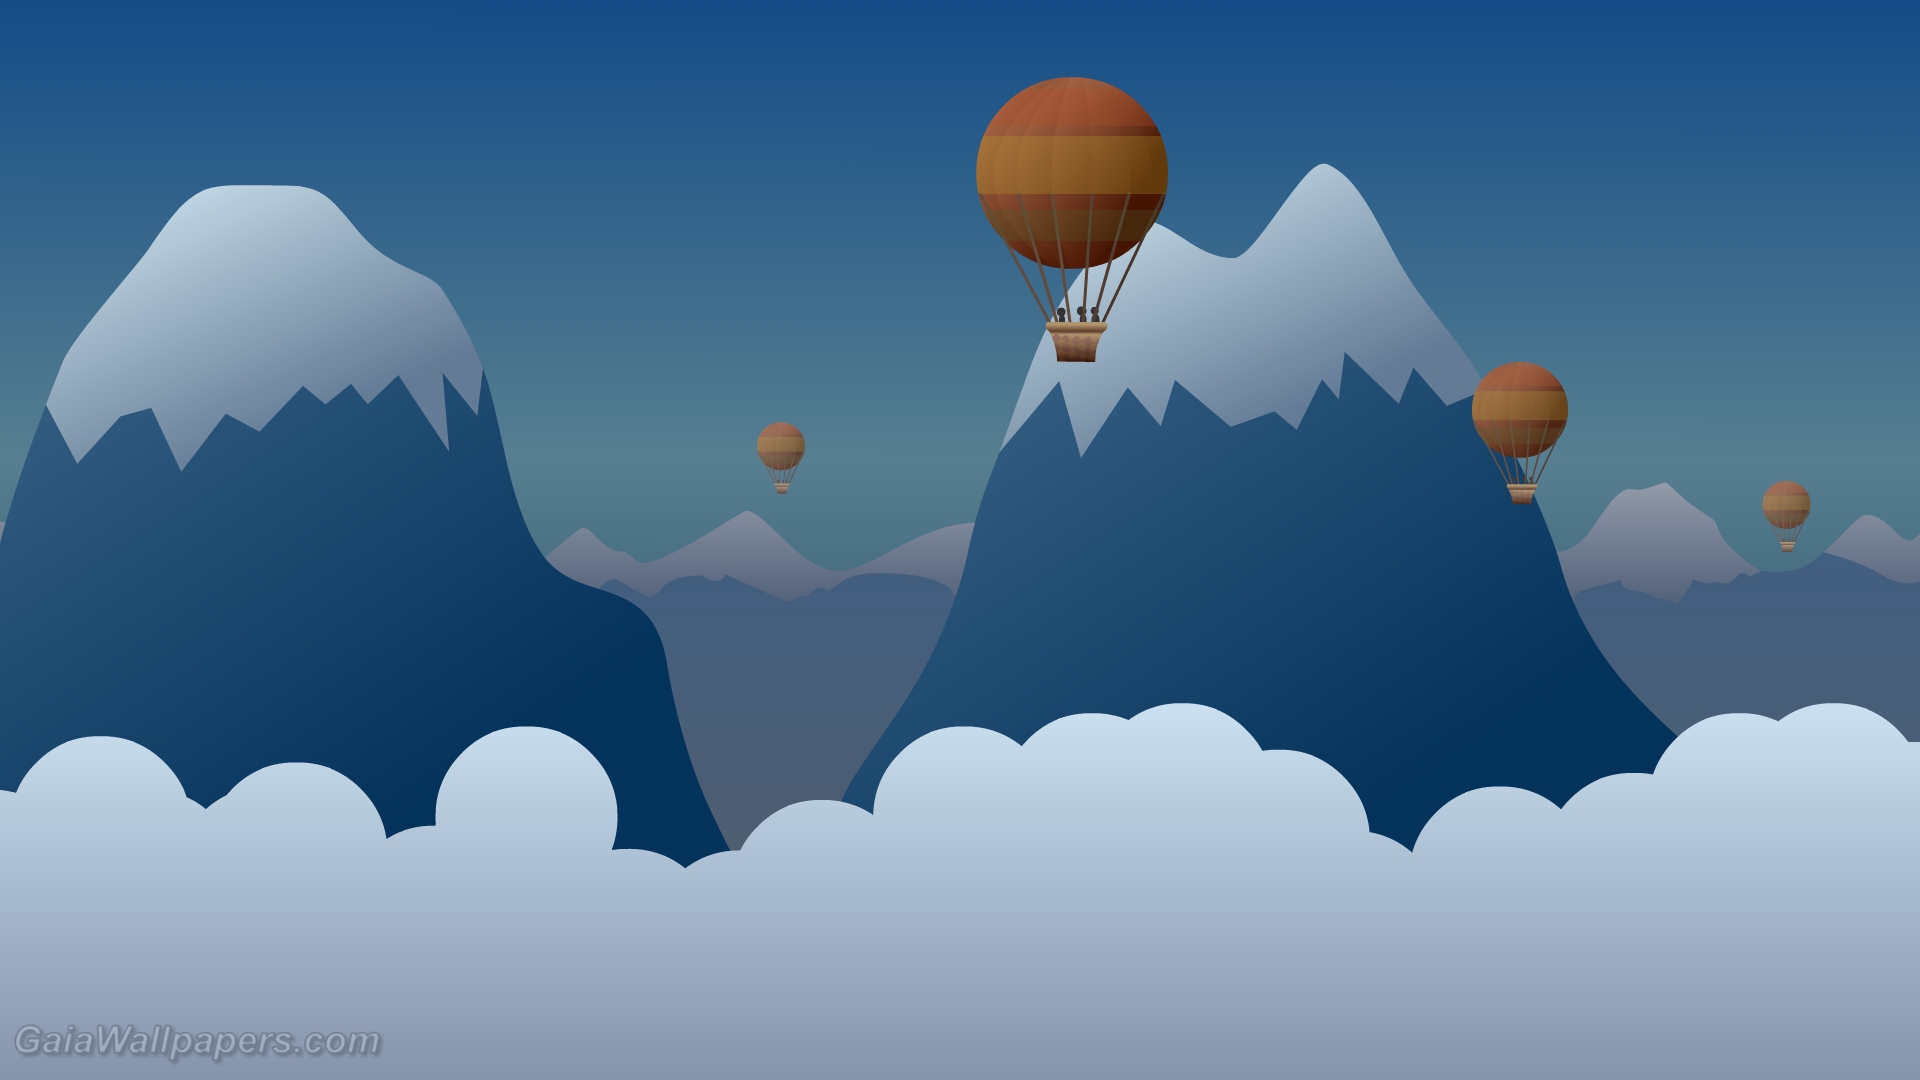 Imaginary balloon trip in the mountains - Free desktop wallpapers